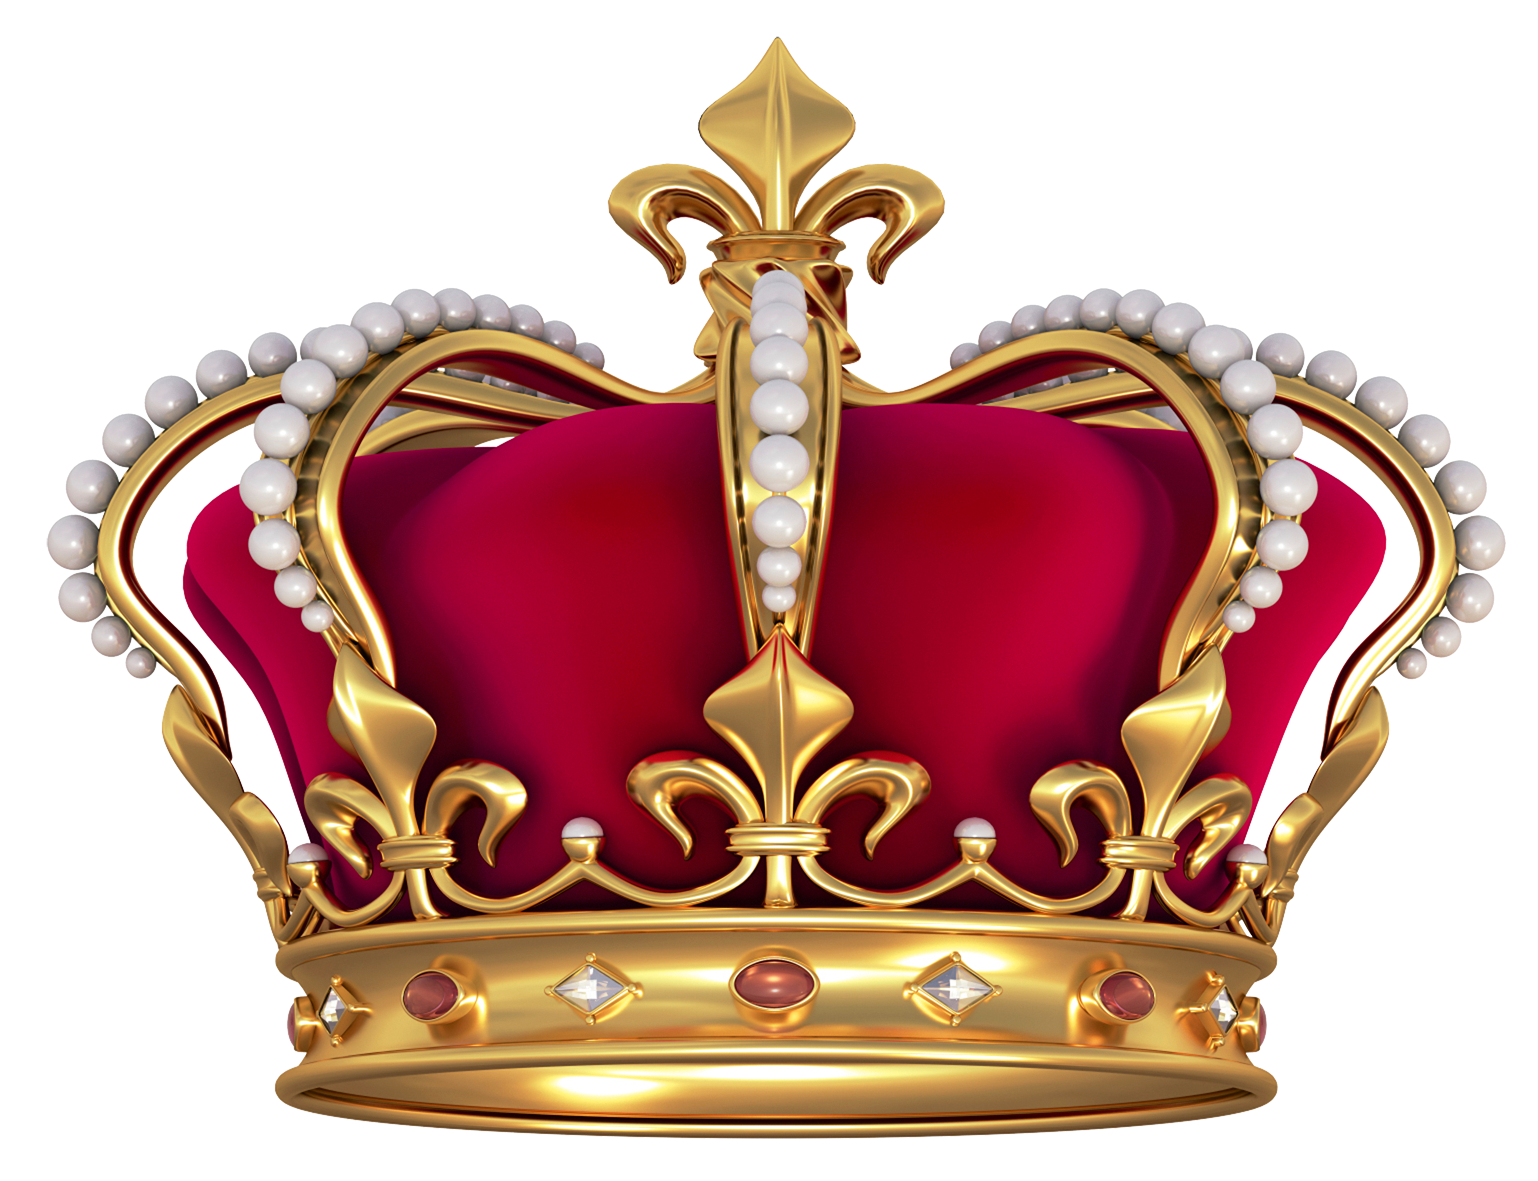 free clipart images crowns - photo #50